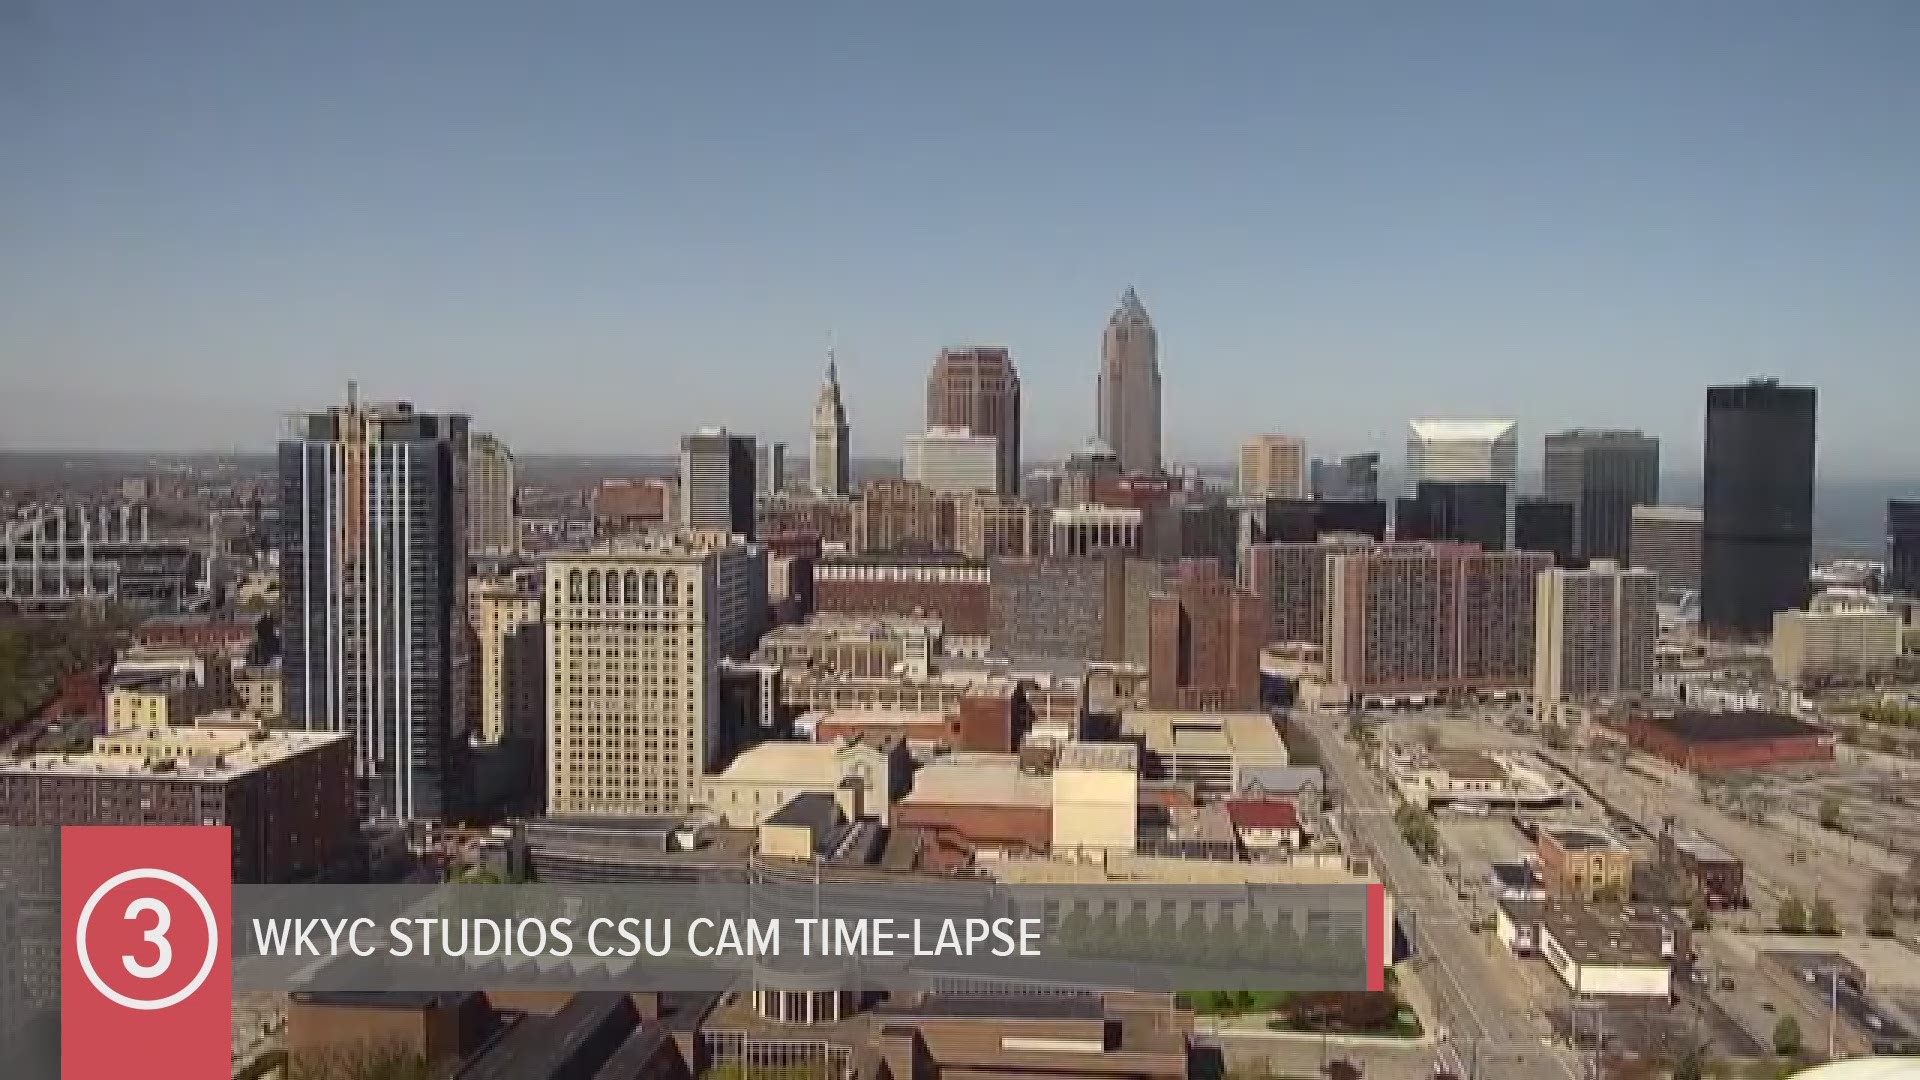 We started Sunday with clouds, then skies became mostly sunny. Now, clouds have returned. Here's our Sunday afternoon time-lapse from the WKYC Studios CSU Cam.